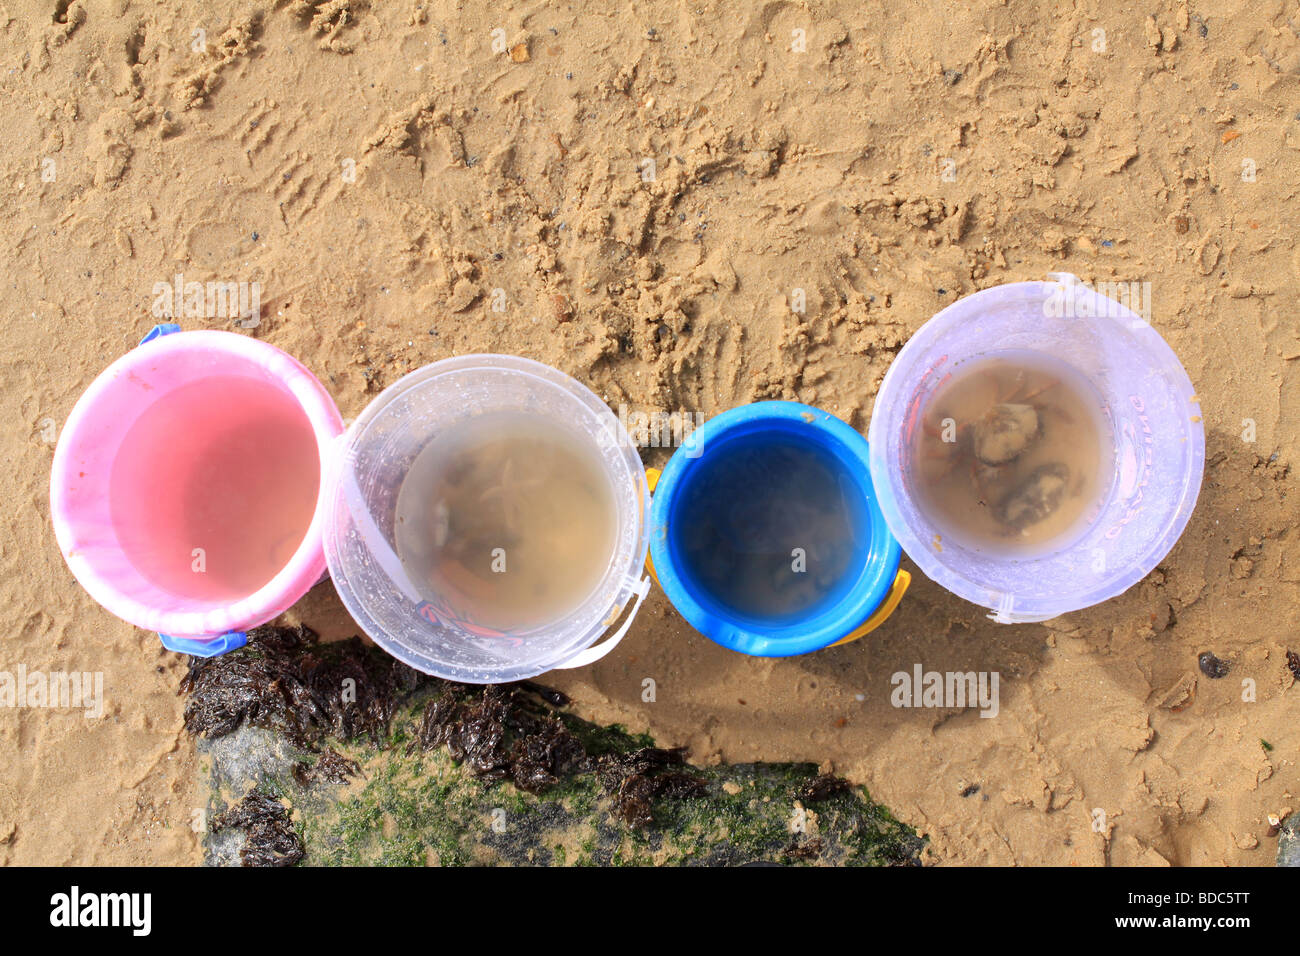 A line of colorful buckets placed on a sandy beach during the summer months Stock Photo